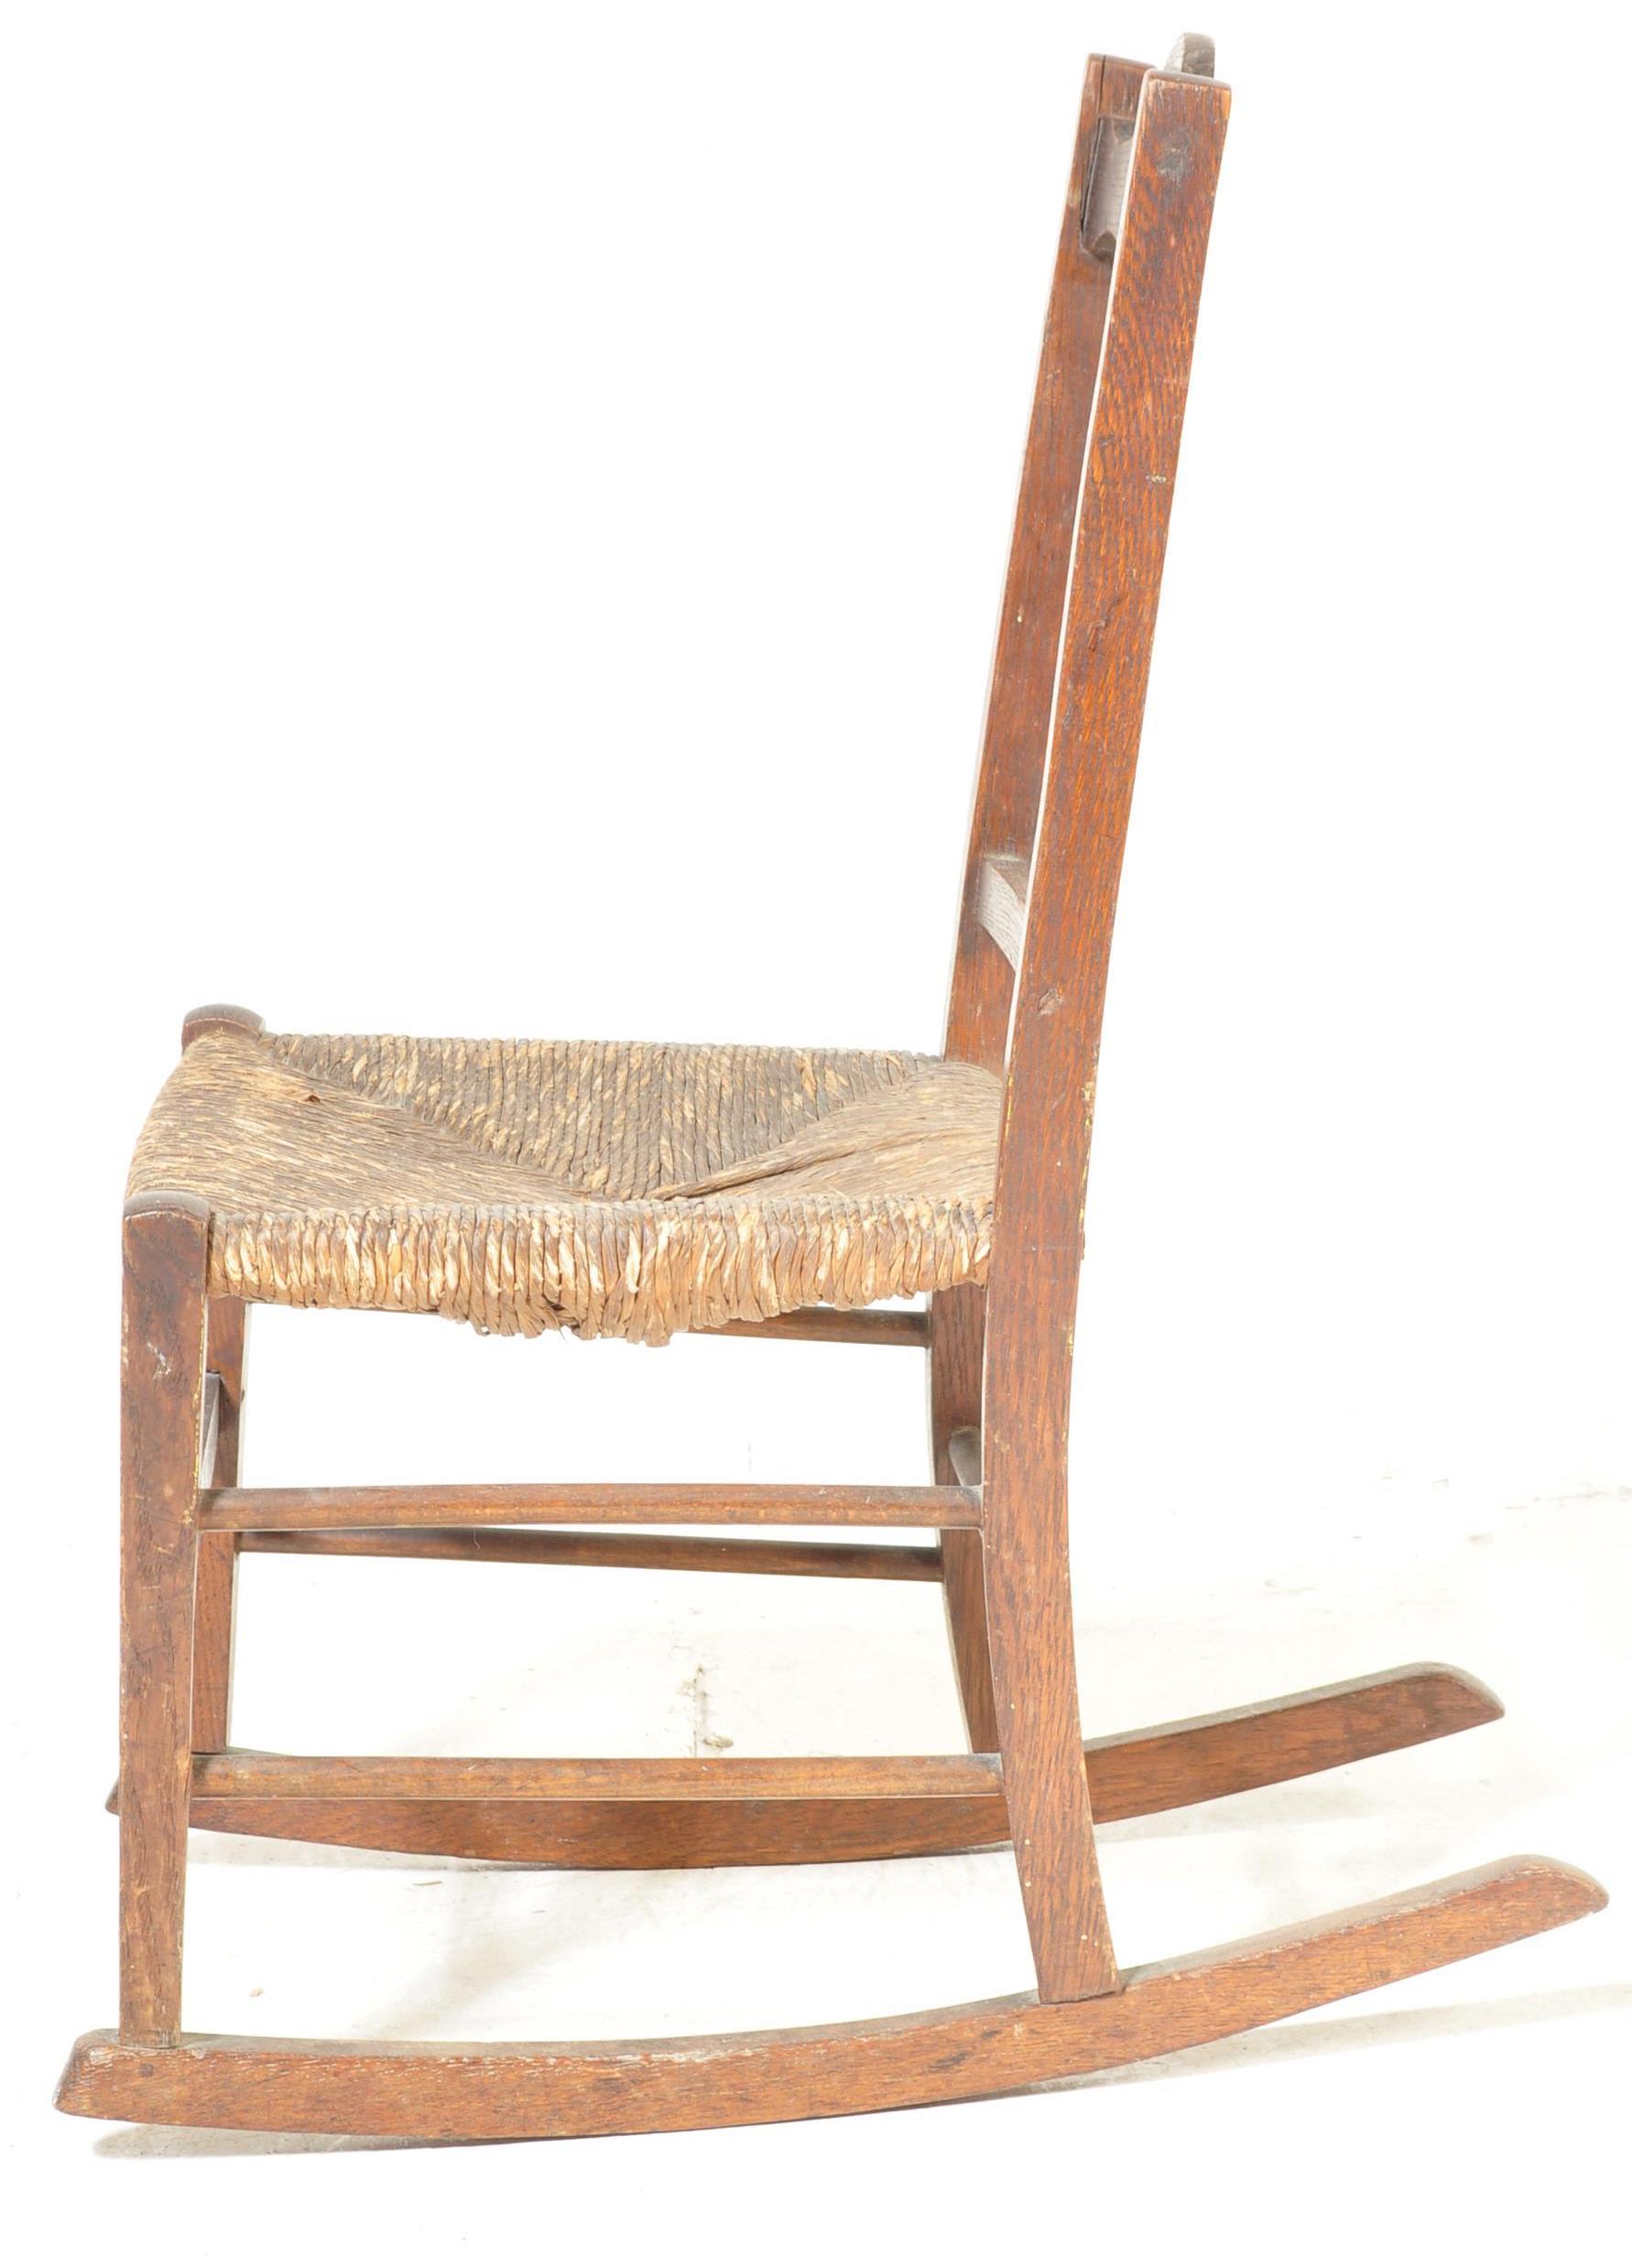 EARLY 20TH CENTURY ARTS & CRAFTS MINATURE ROCKING CHAIR - Image 5 of 6